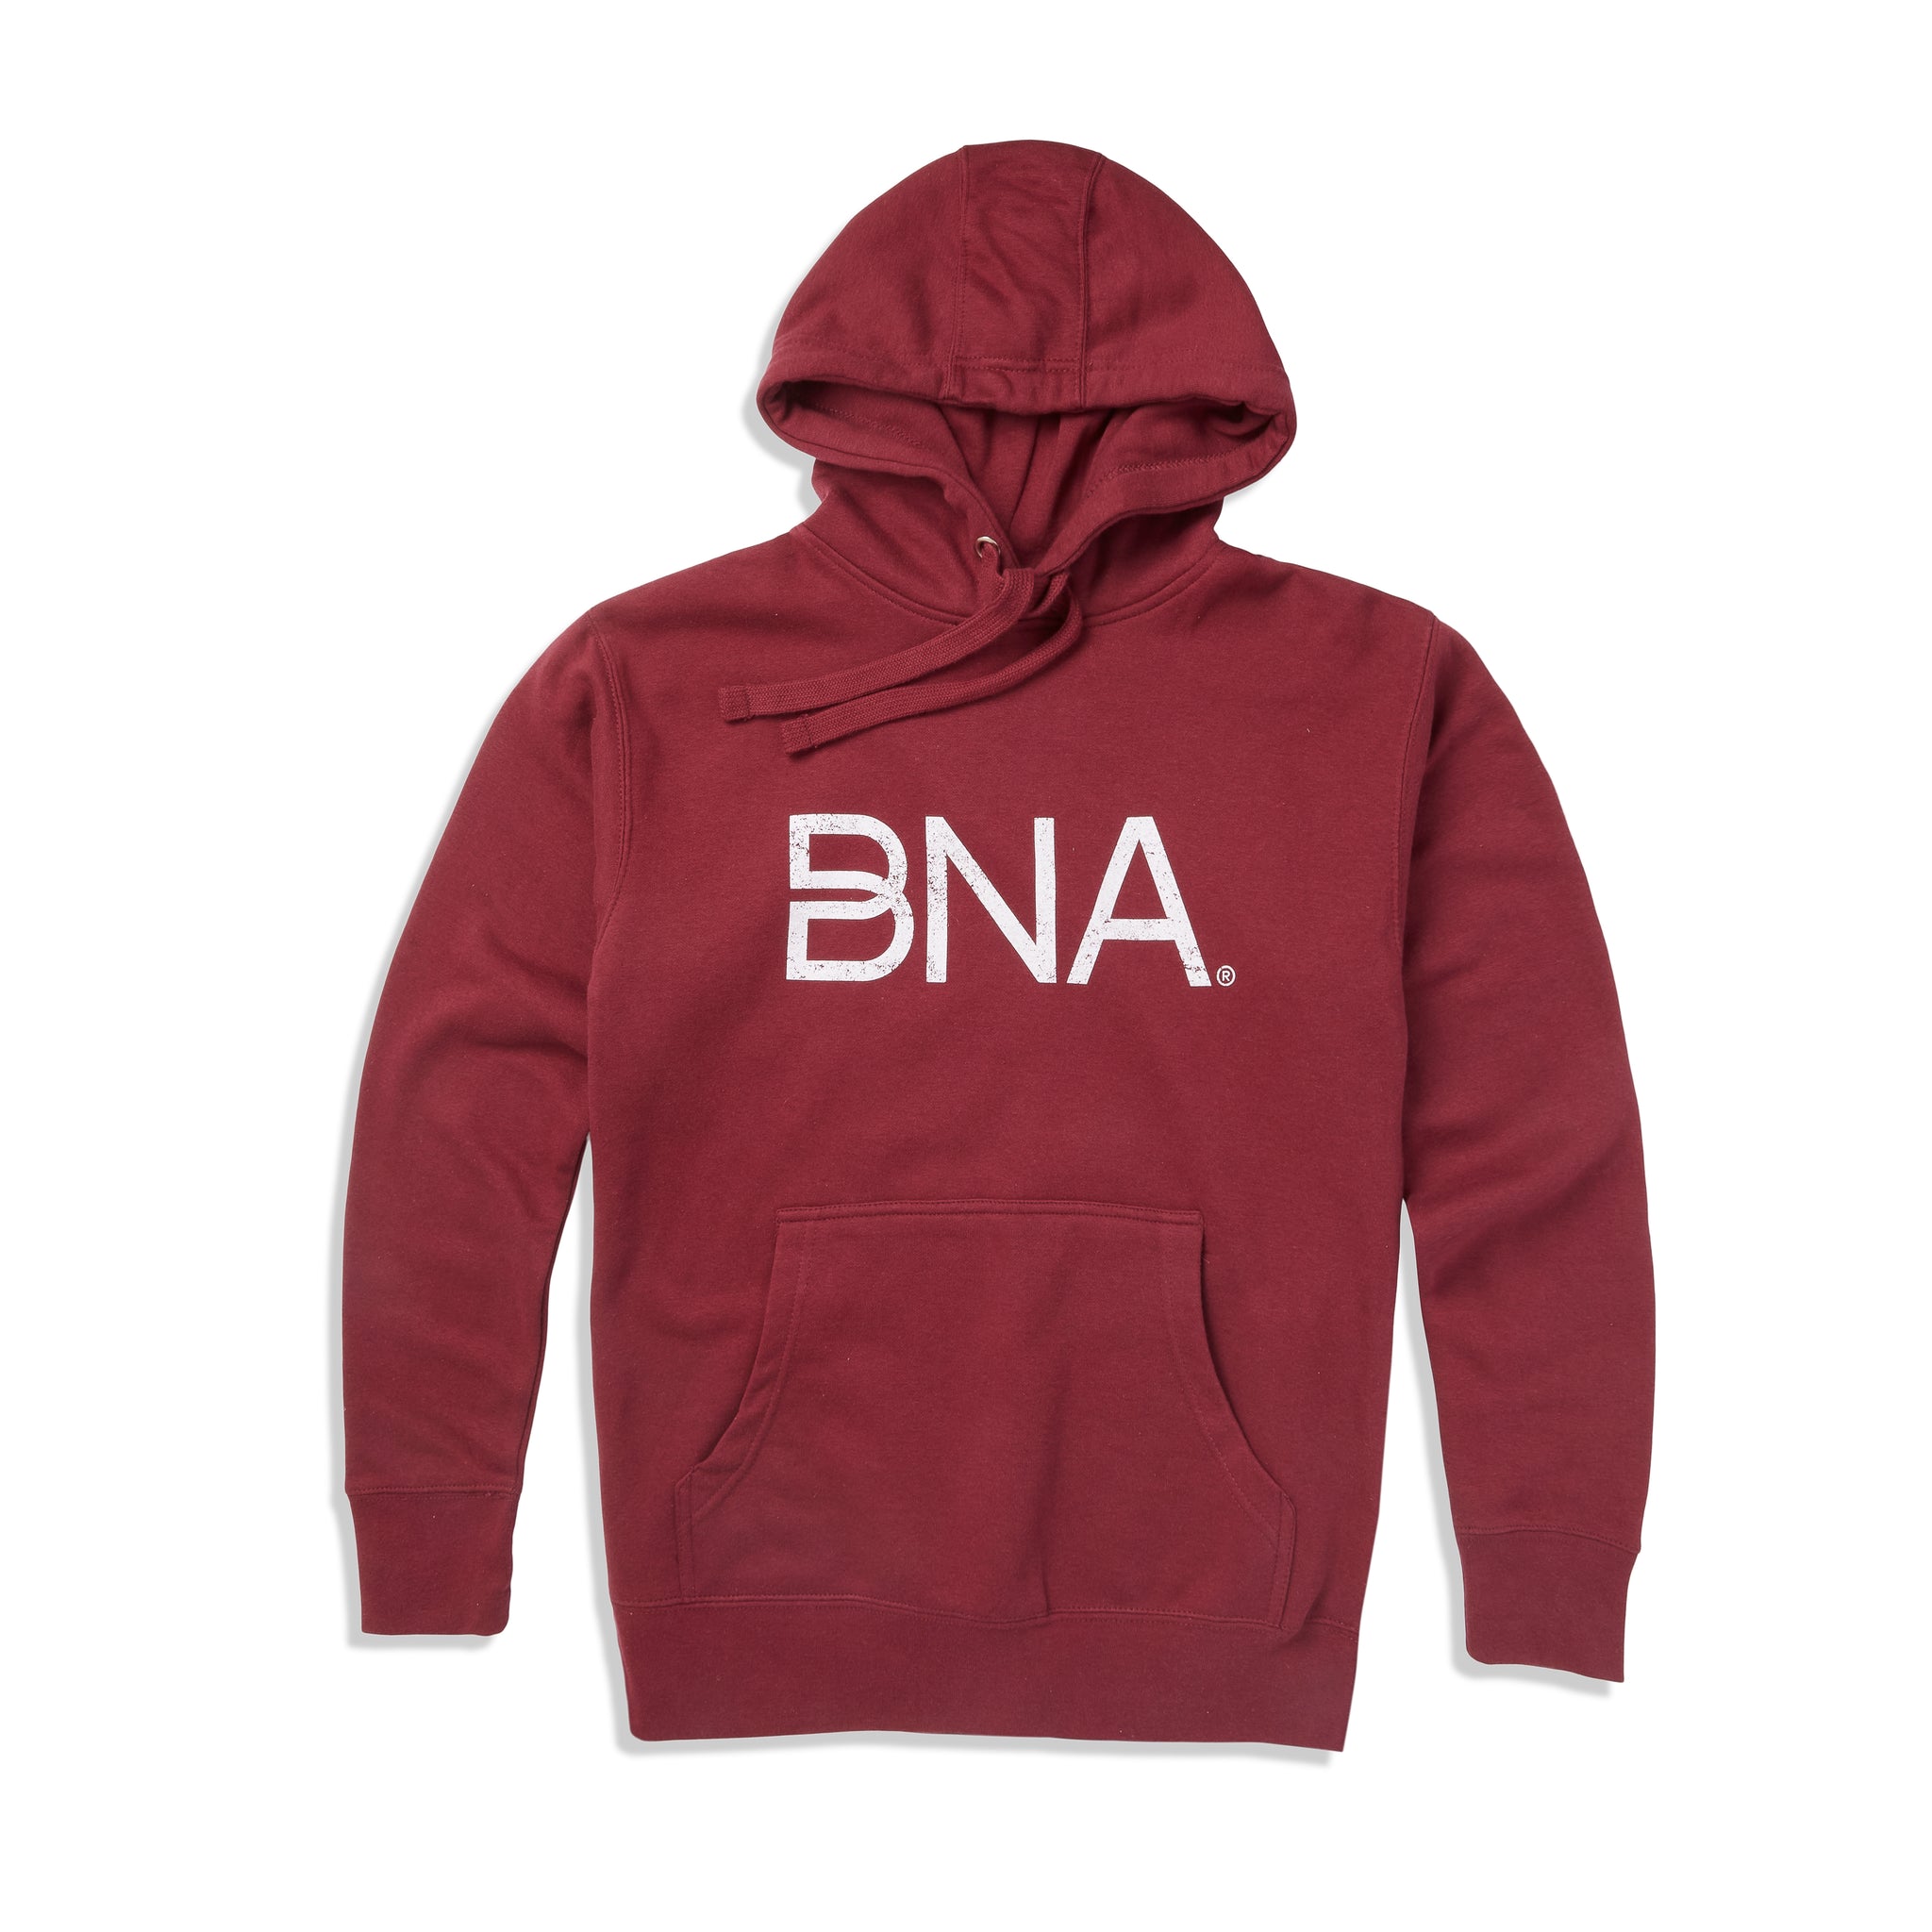 Maroon unisex hoodie with distressed white BNA logo